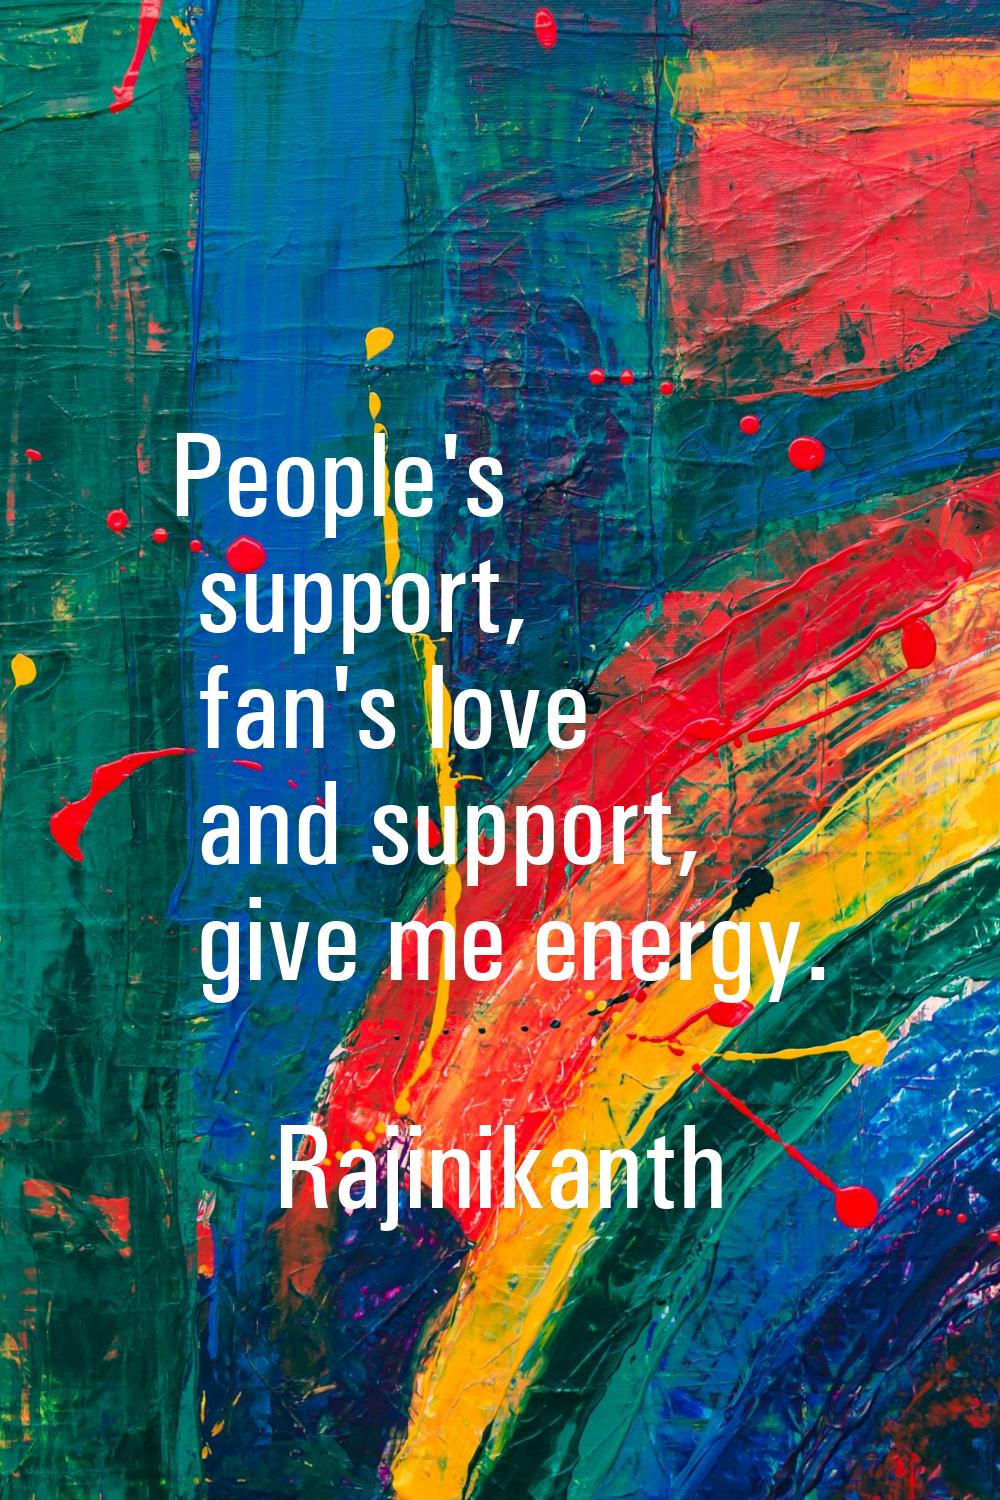 People's support, fan's love and support, give me energy.